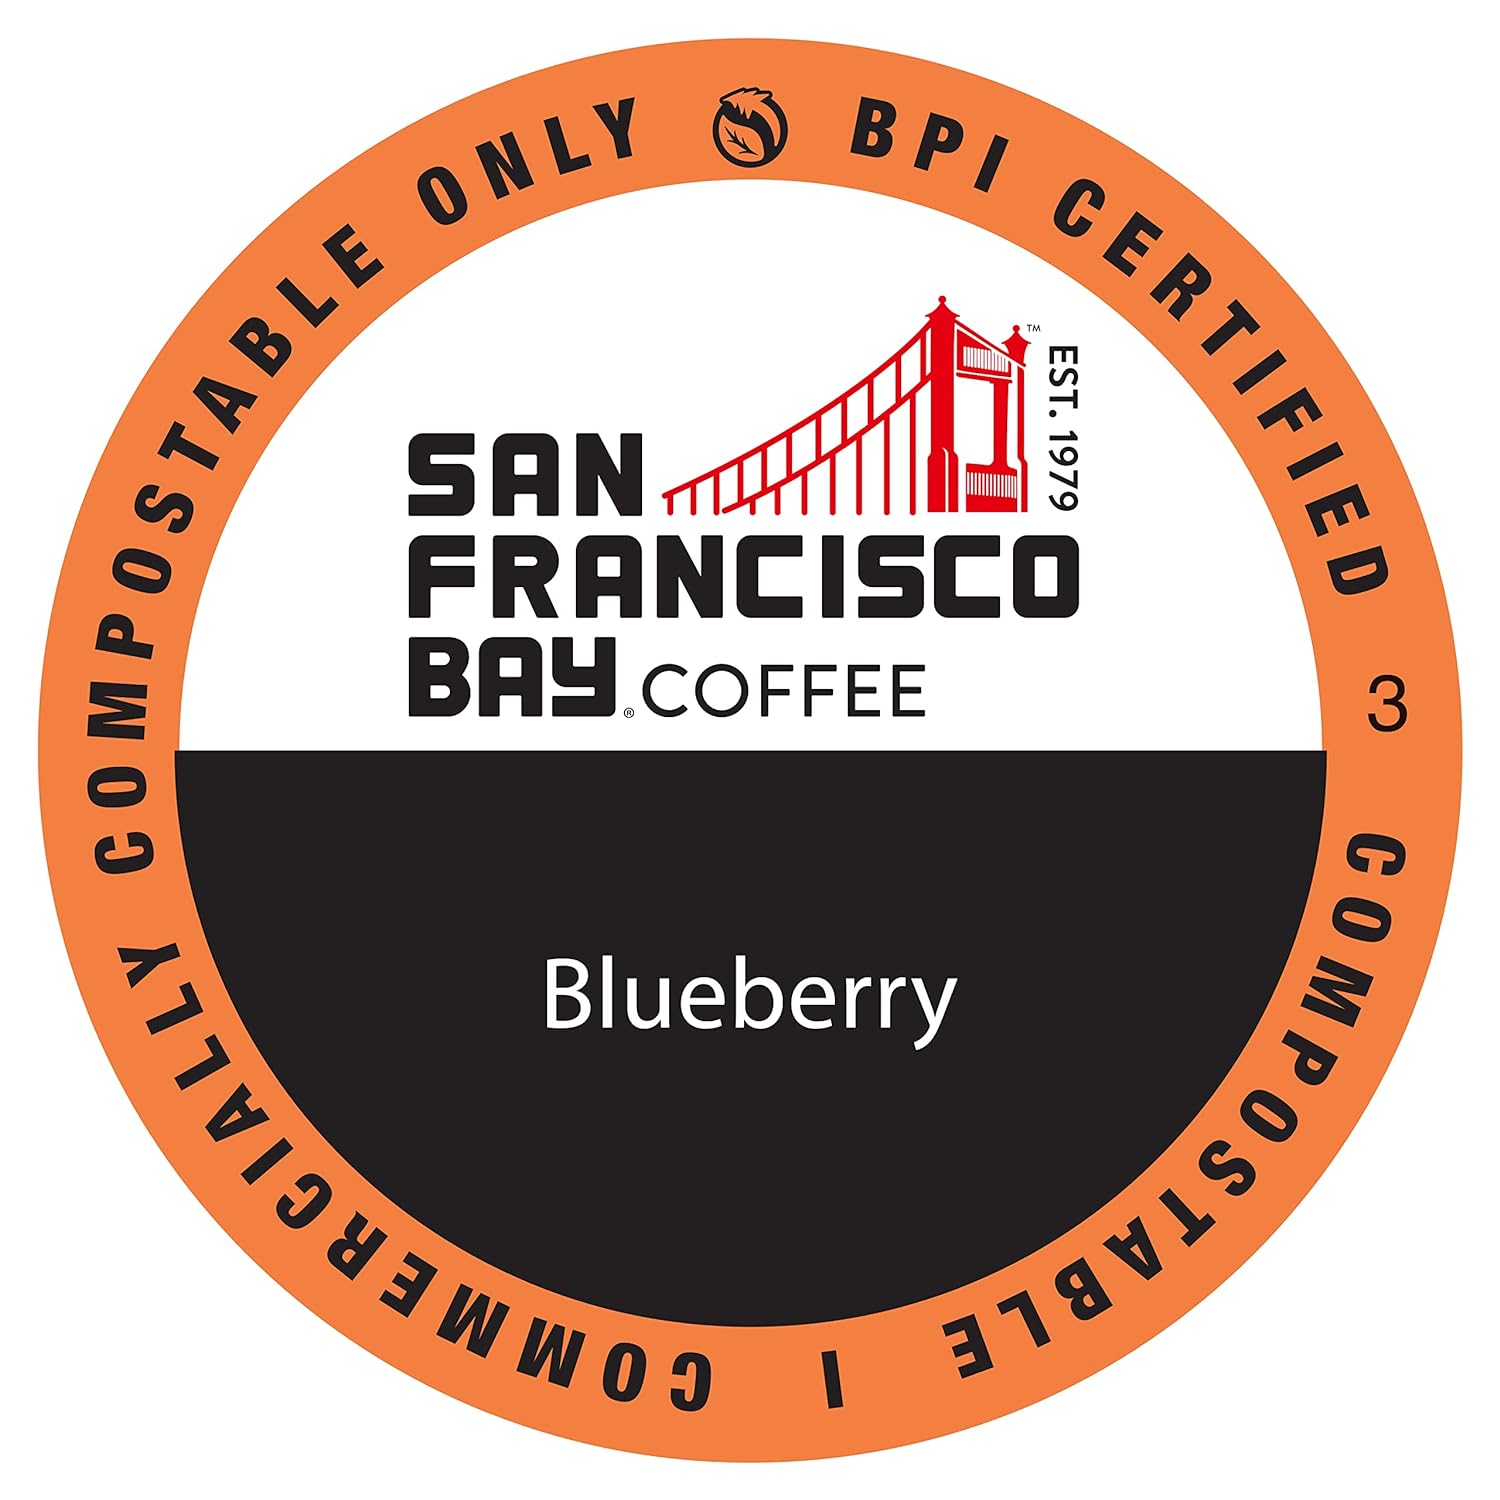 San Francisco Bay Compostable Coffee Pods - Blueberry (80 Ct) K Cup Compatible including Keurig 2.0, Flavored, Medium Roast